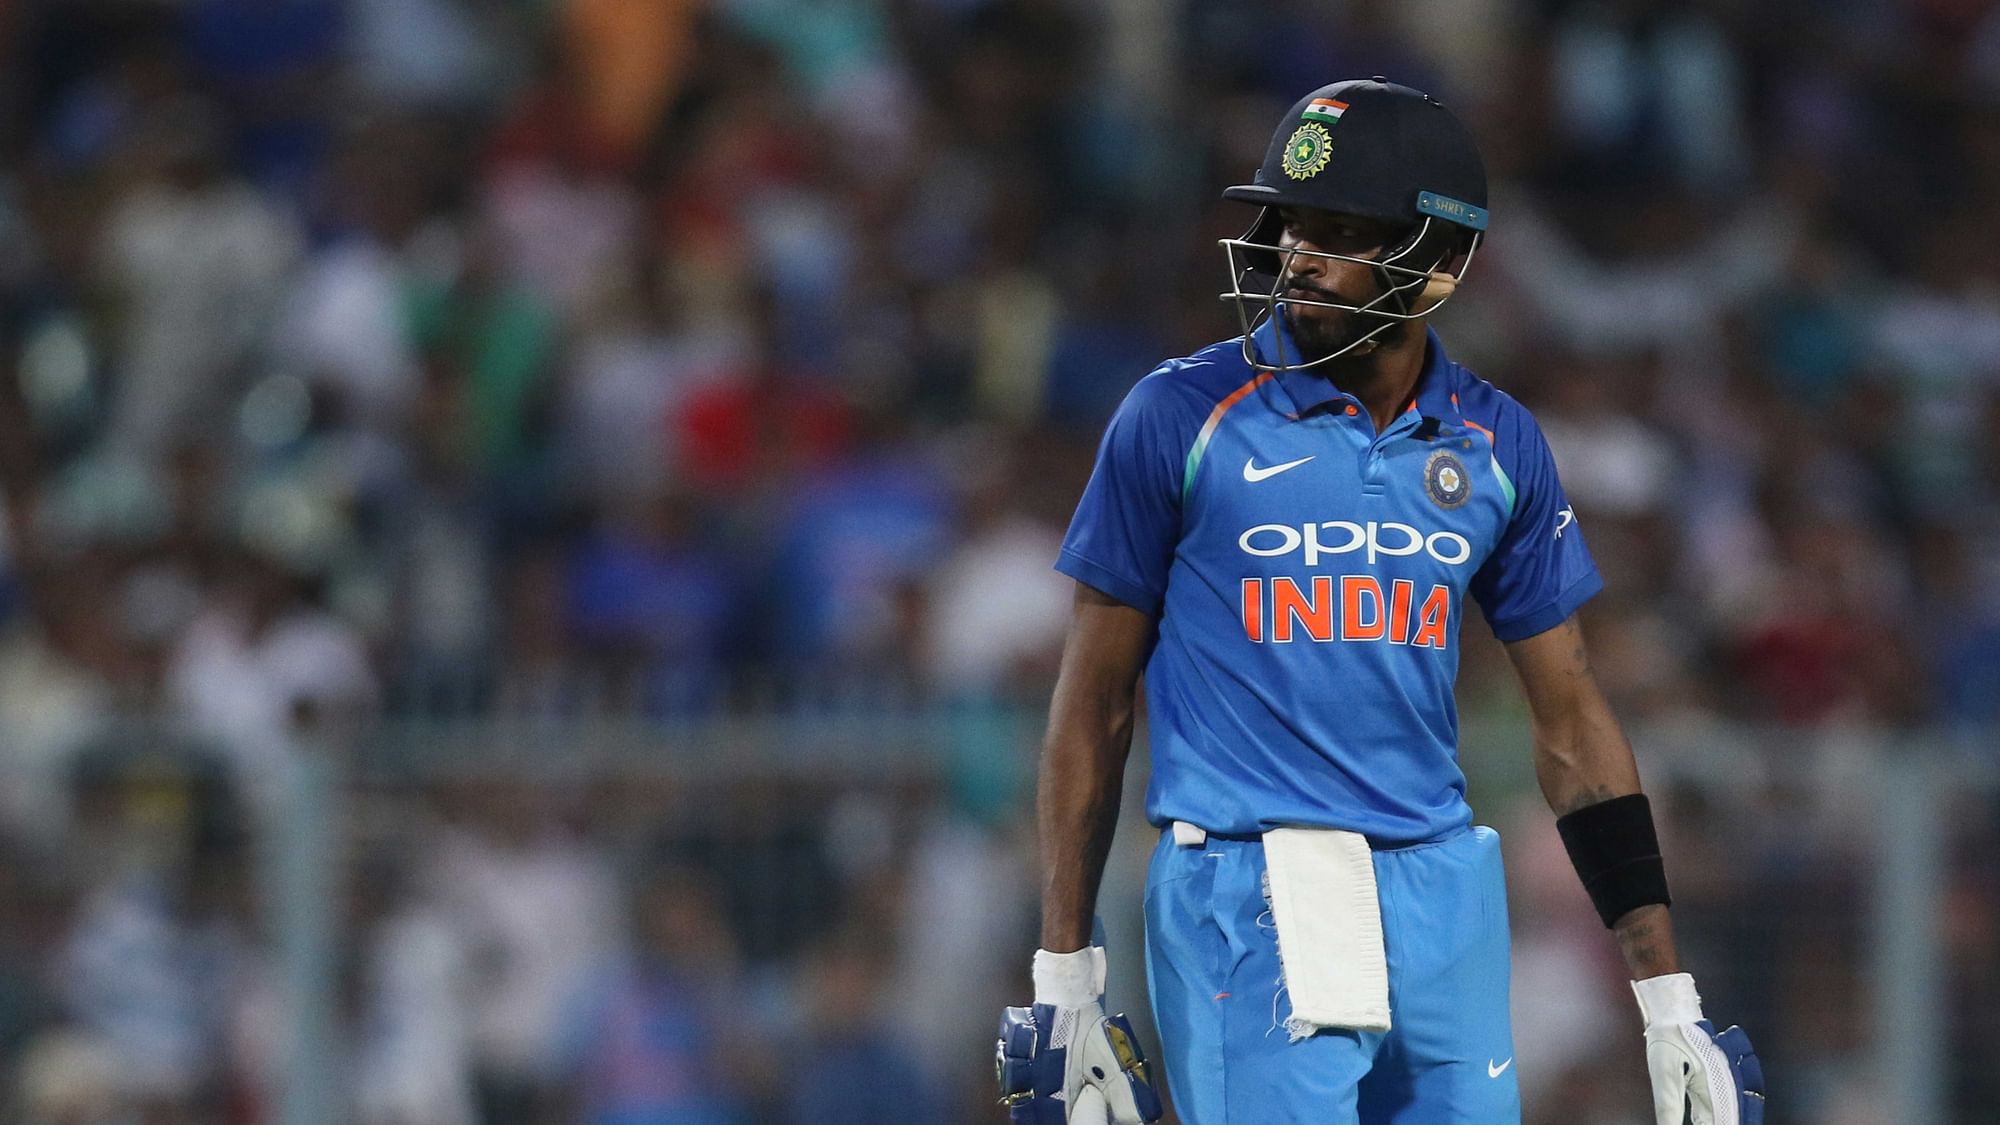 Hardik Pandya thought he was caught and walked off but was given not out by the umpires.